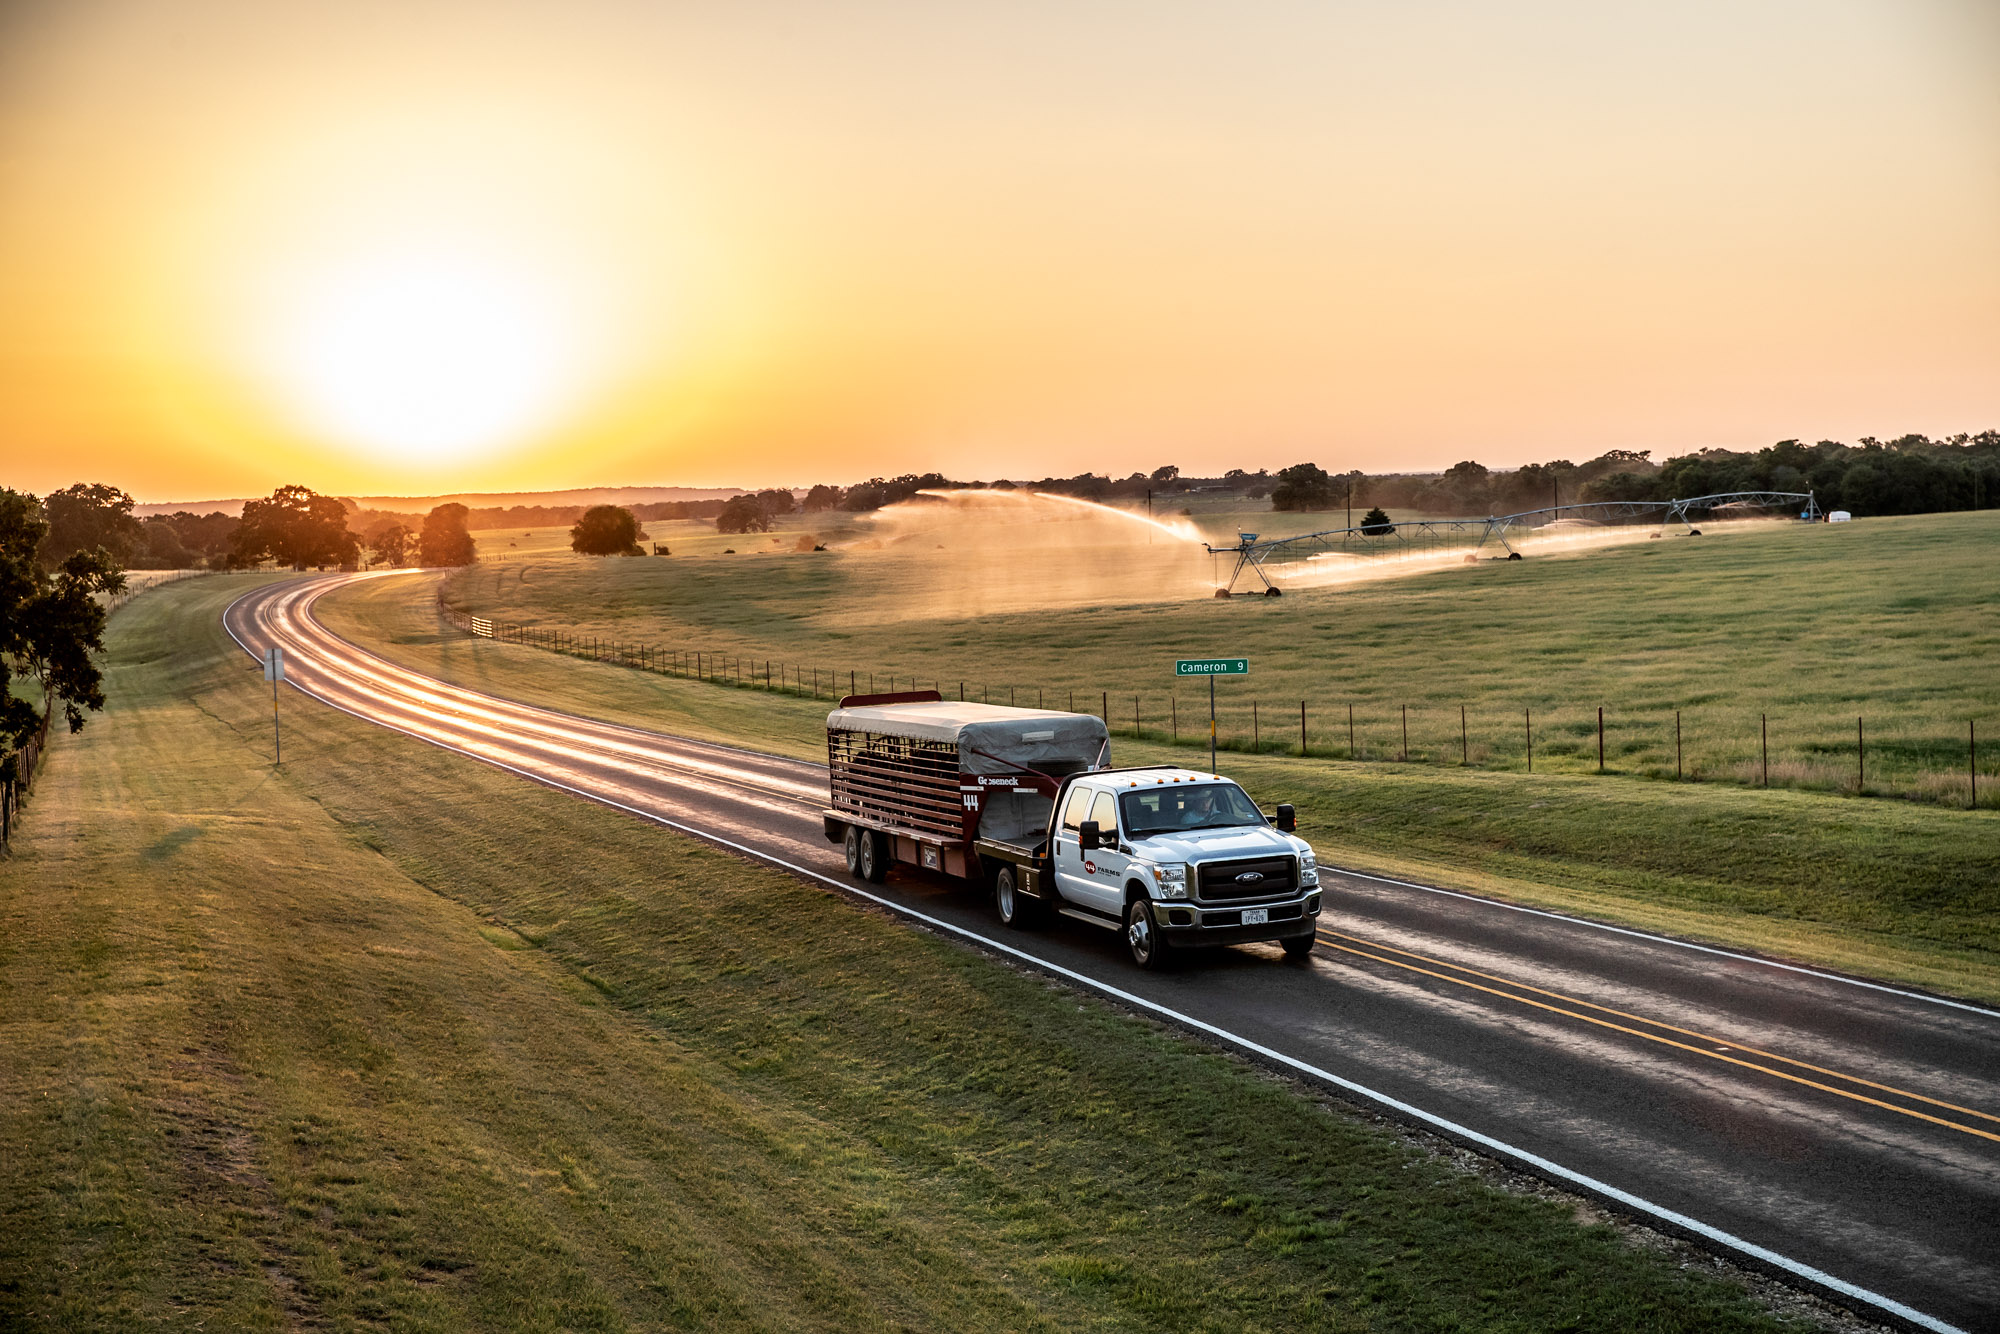 truck and horse trailer driving down road highway at sunset sunrise in texas 44 farms green pasture field